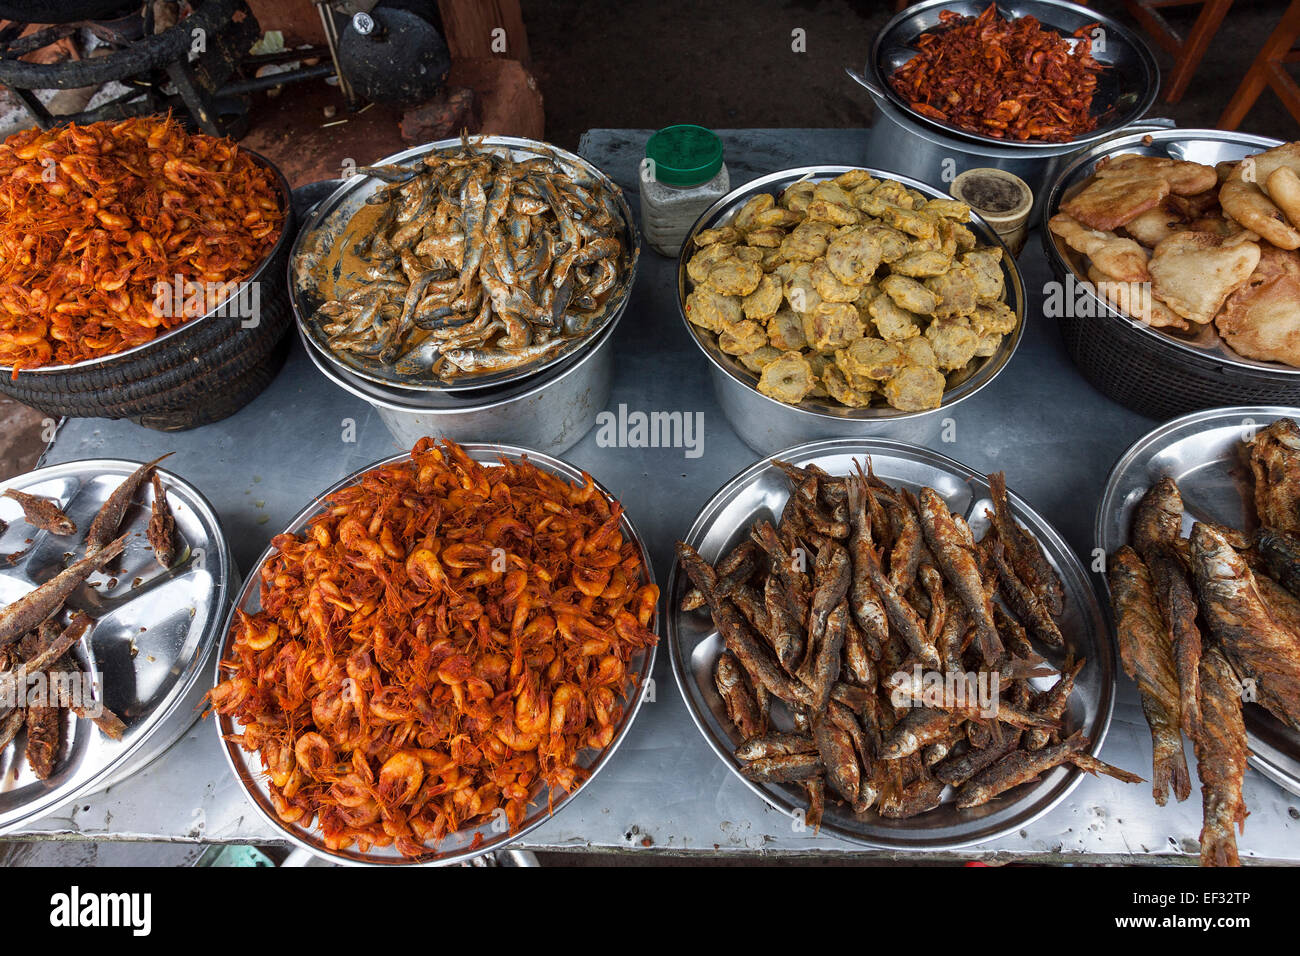 Nepalese dishes, fish, shrimps, in a Nepalese street restaurant, Mugling, Nepal Stock Photo